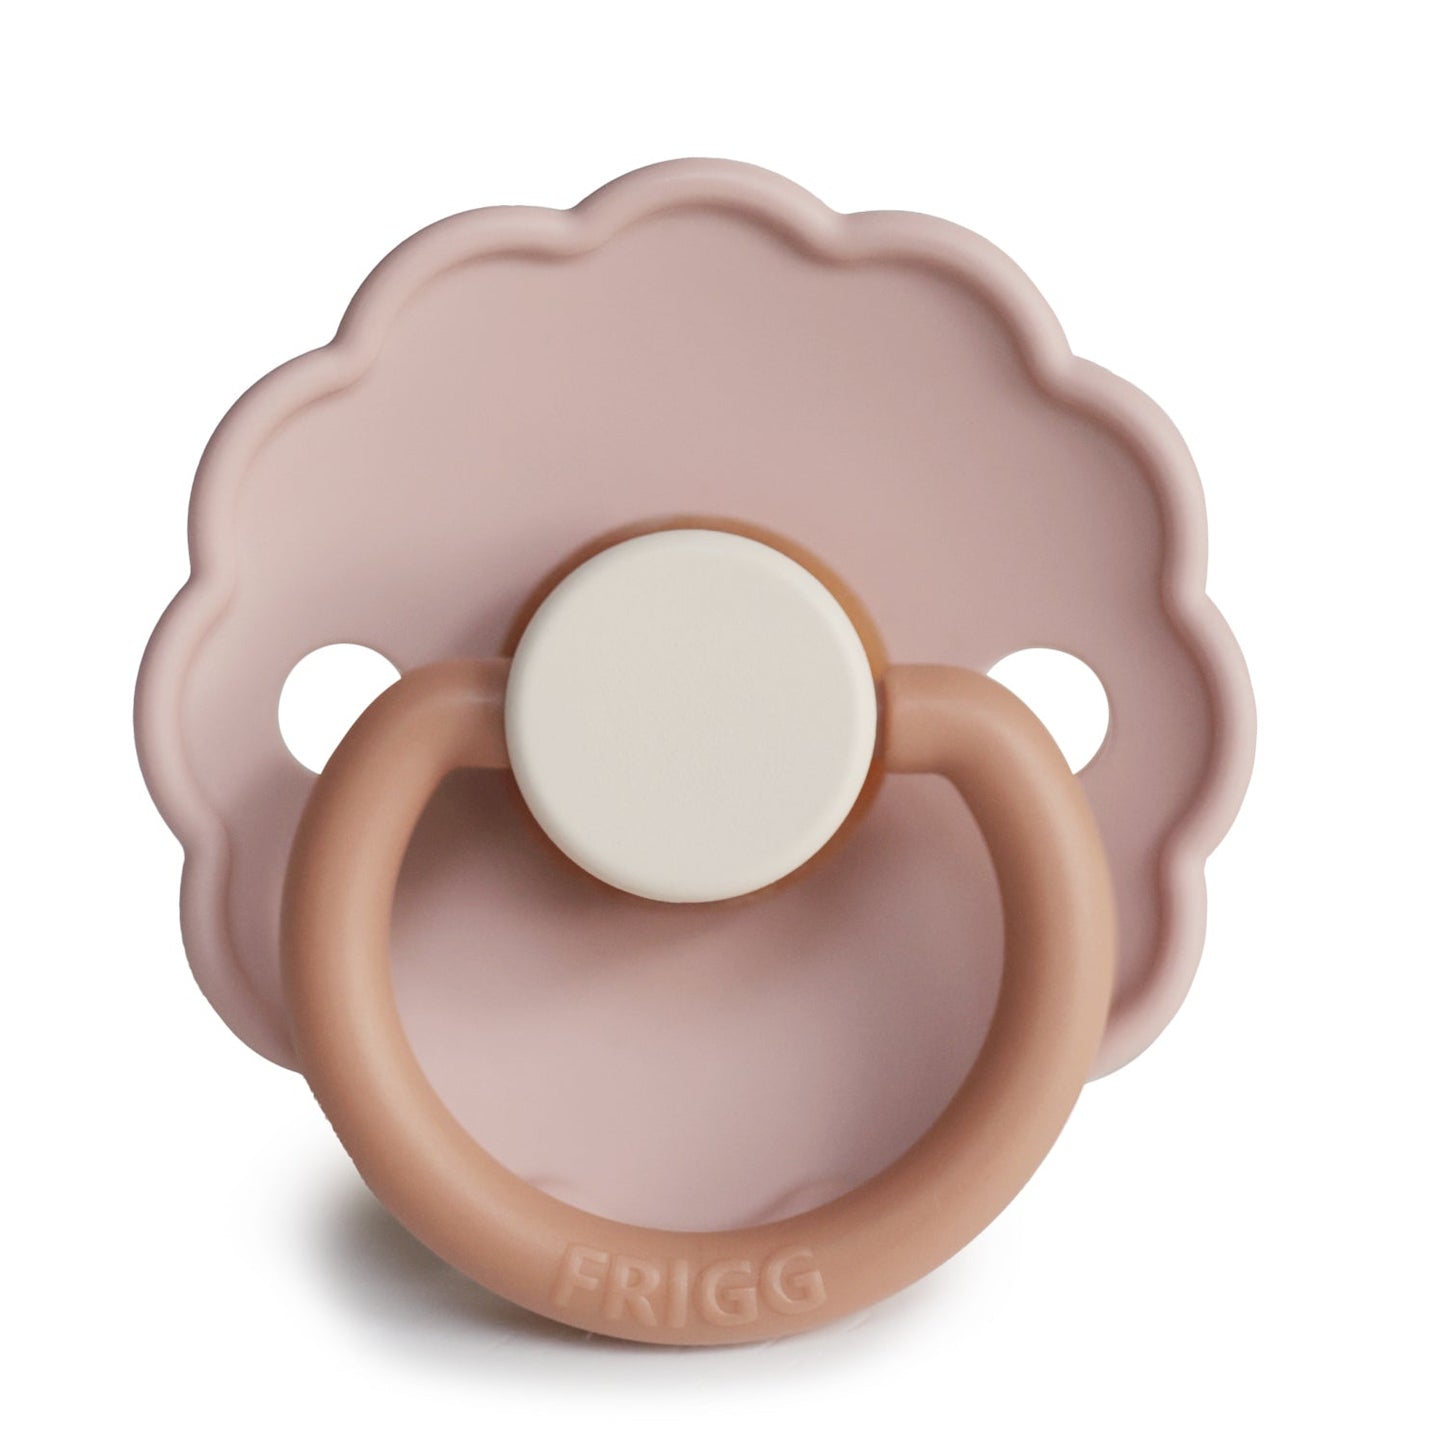 Frigg pacifier Silicone - Daisy and Daisy Night - Size 2